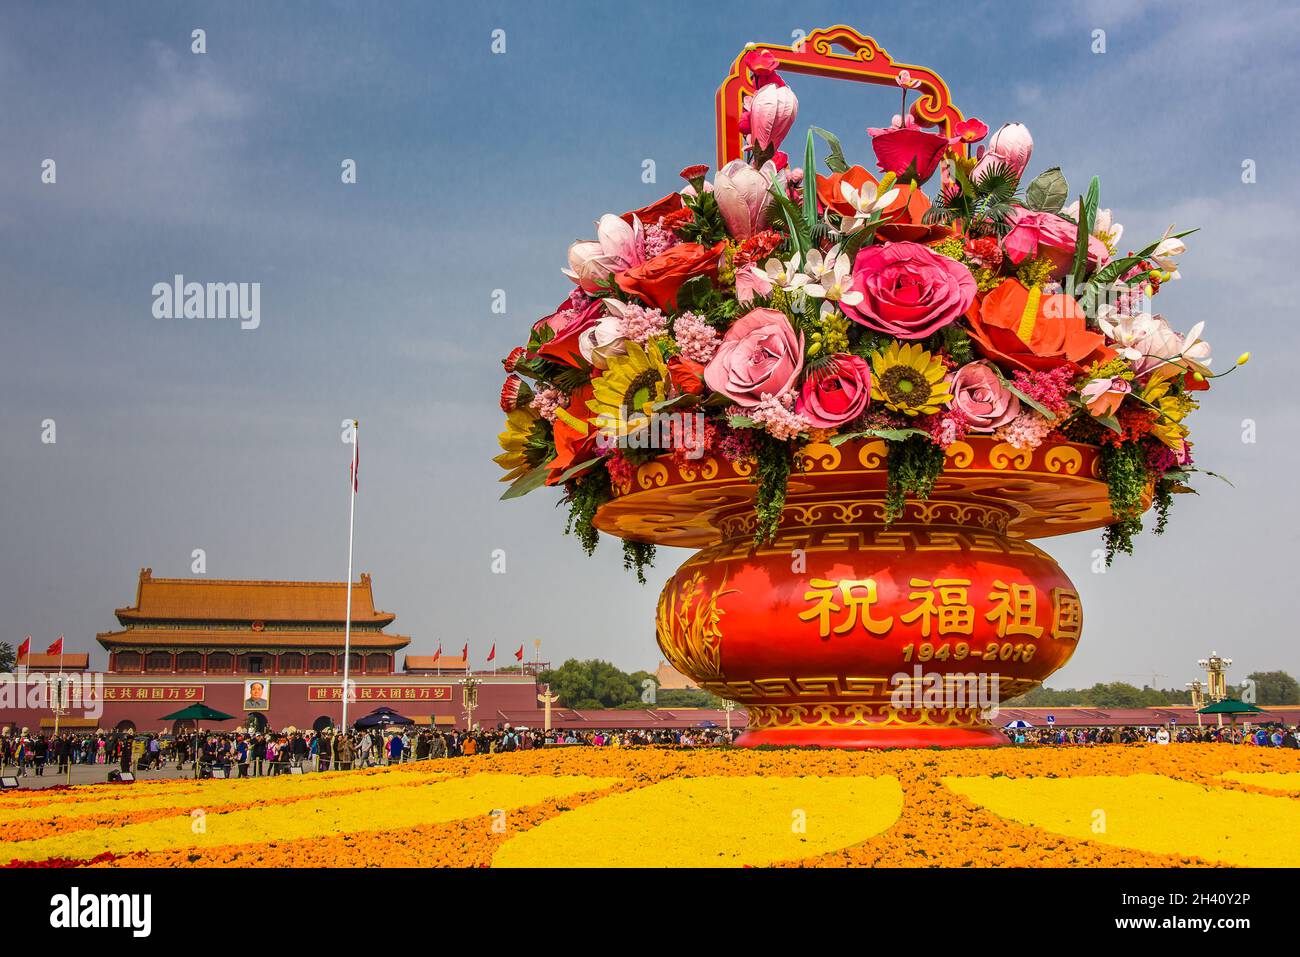 69Â° Anniversary of the People's Republic of China Stock Photo